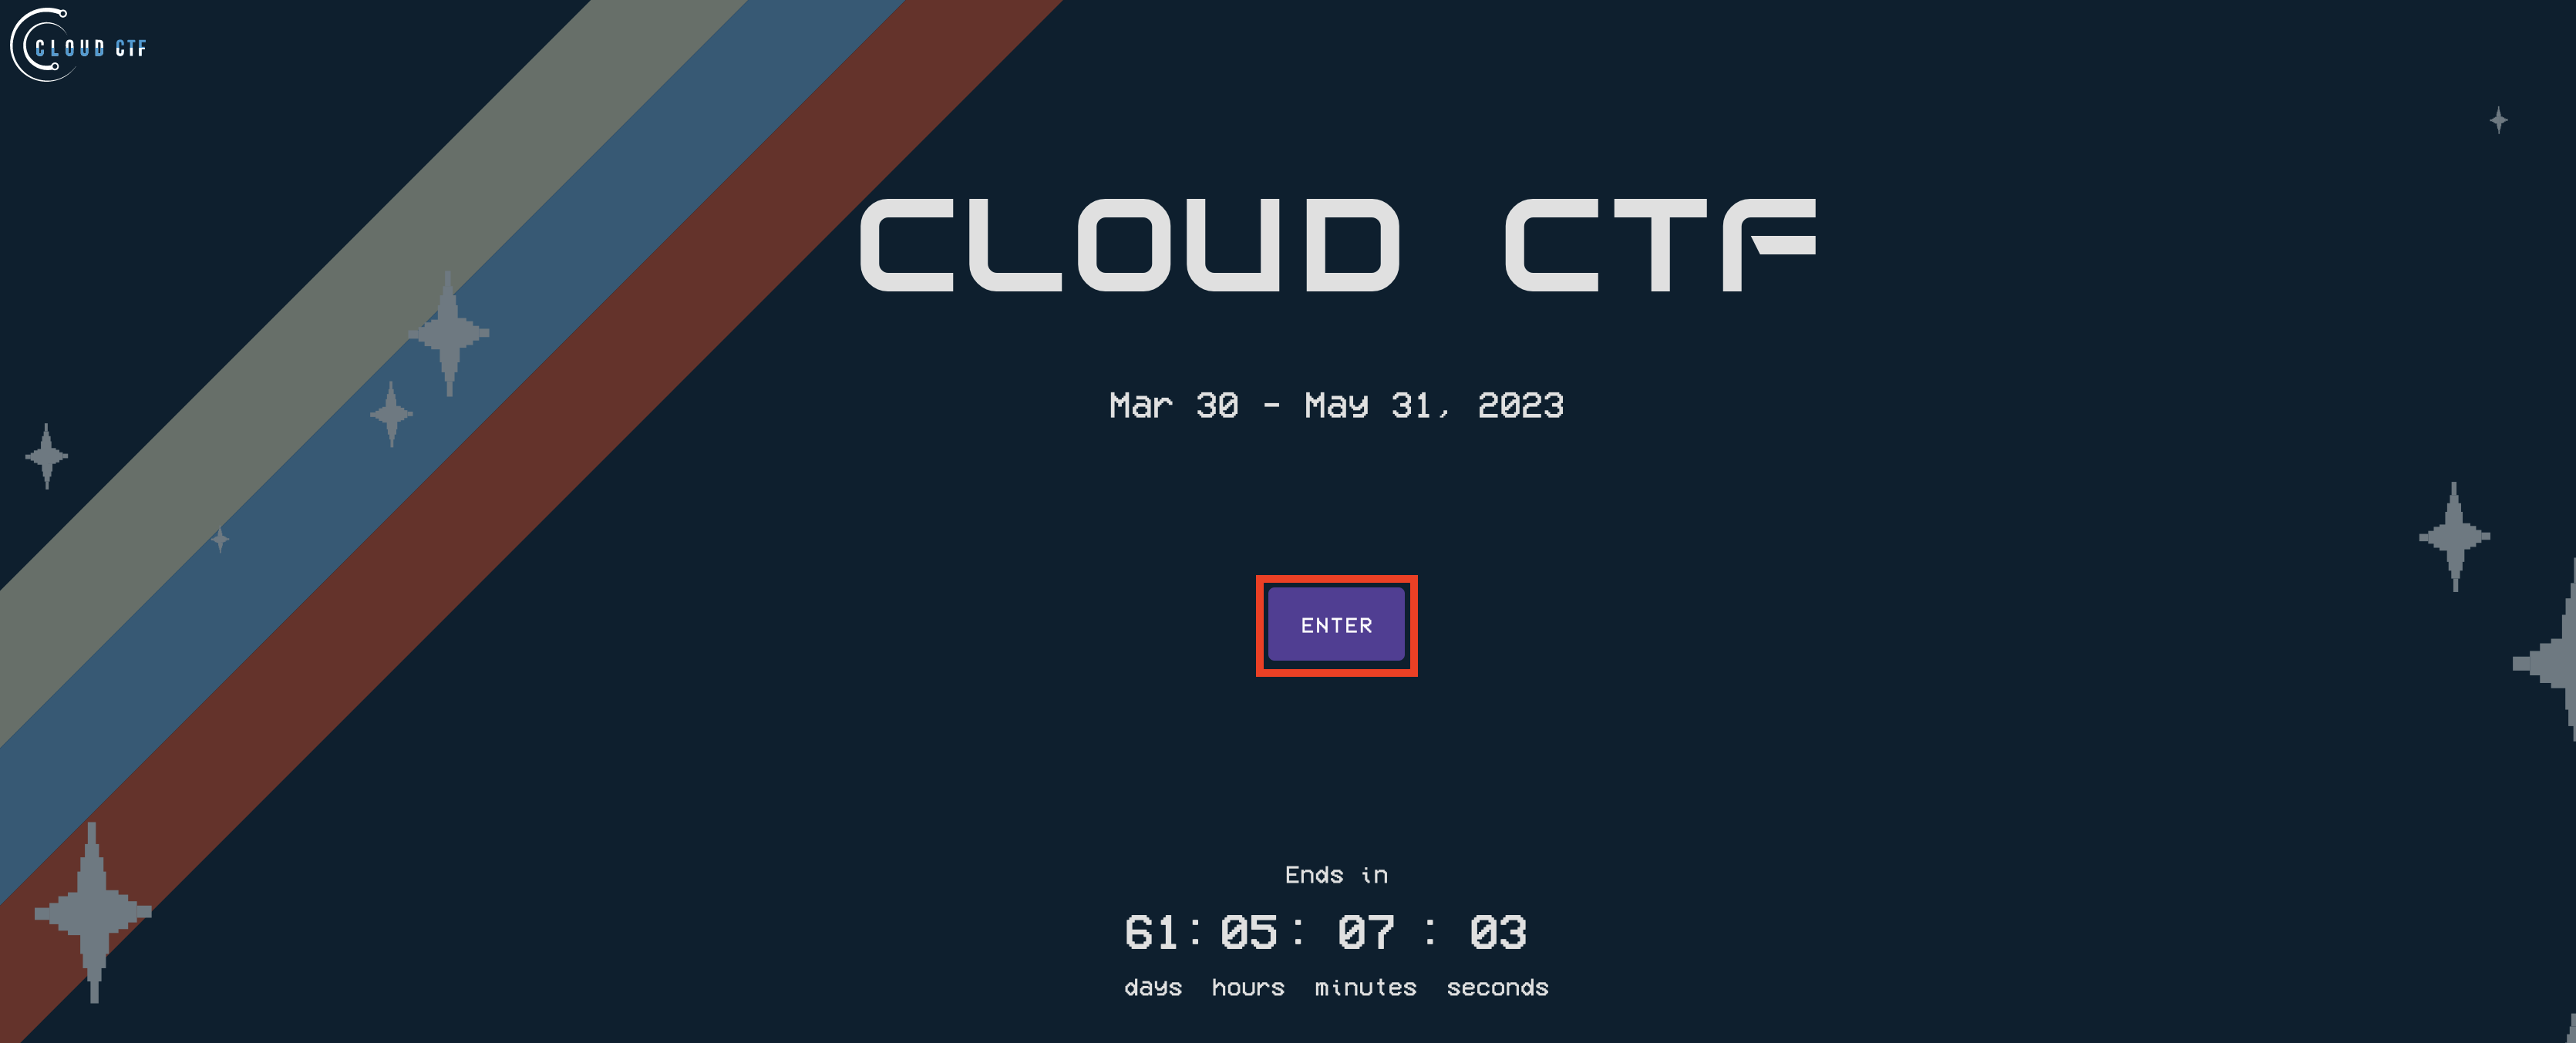 The CloudCTF start page contains the title for CloudCTF, the current date and time, a start button for starting or joining the competition, and the remaining time until the CTF concludes.